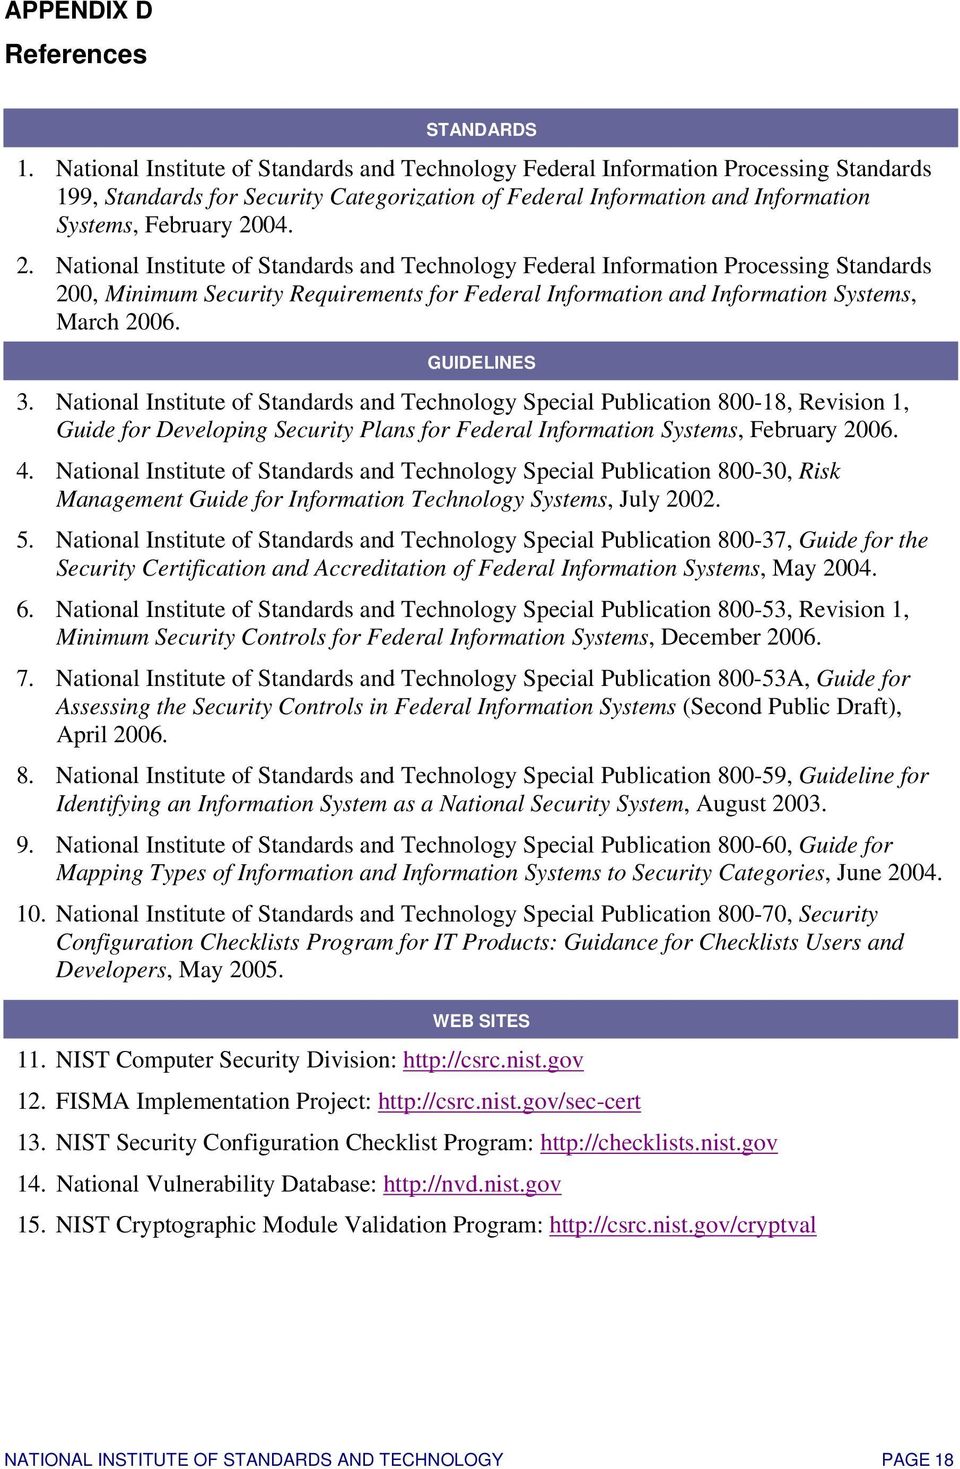 04. 2. National Institute of Standards and Technology Federal Information Processing Standards 200, Minimum Security Requirements for Federal Information and Information Systems, March 2006.